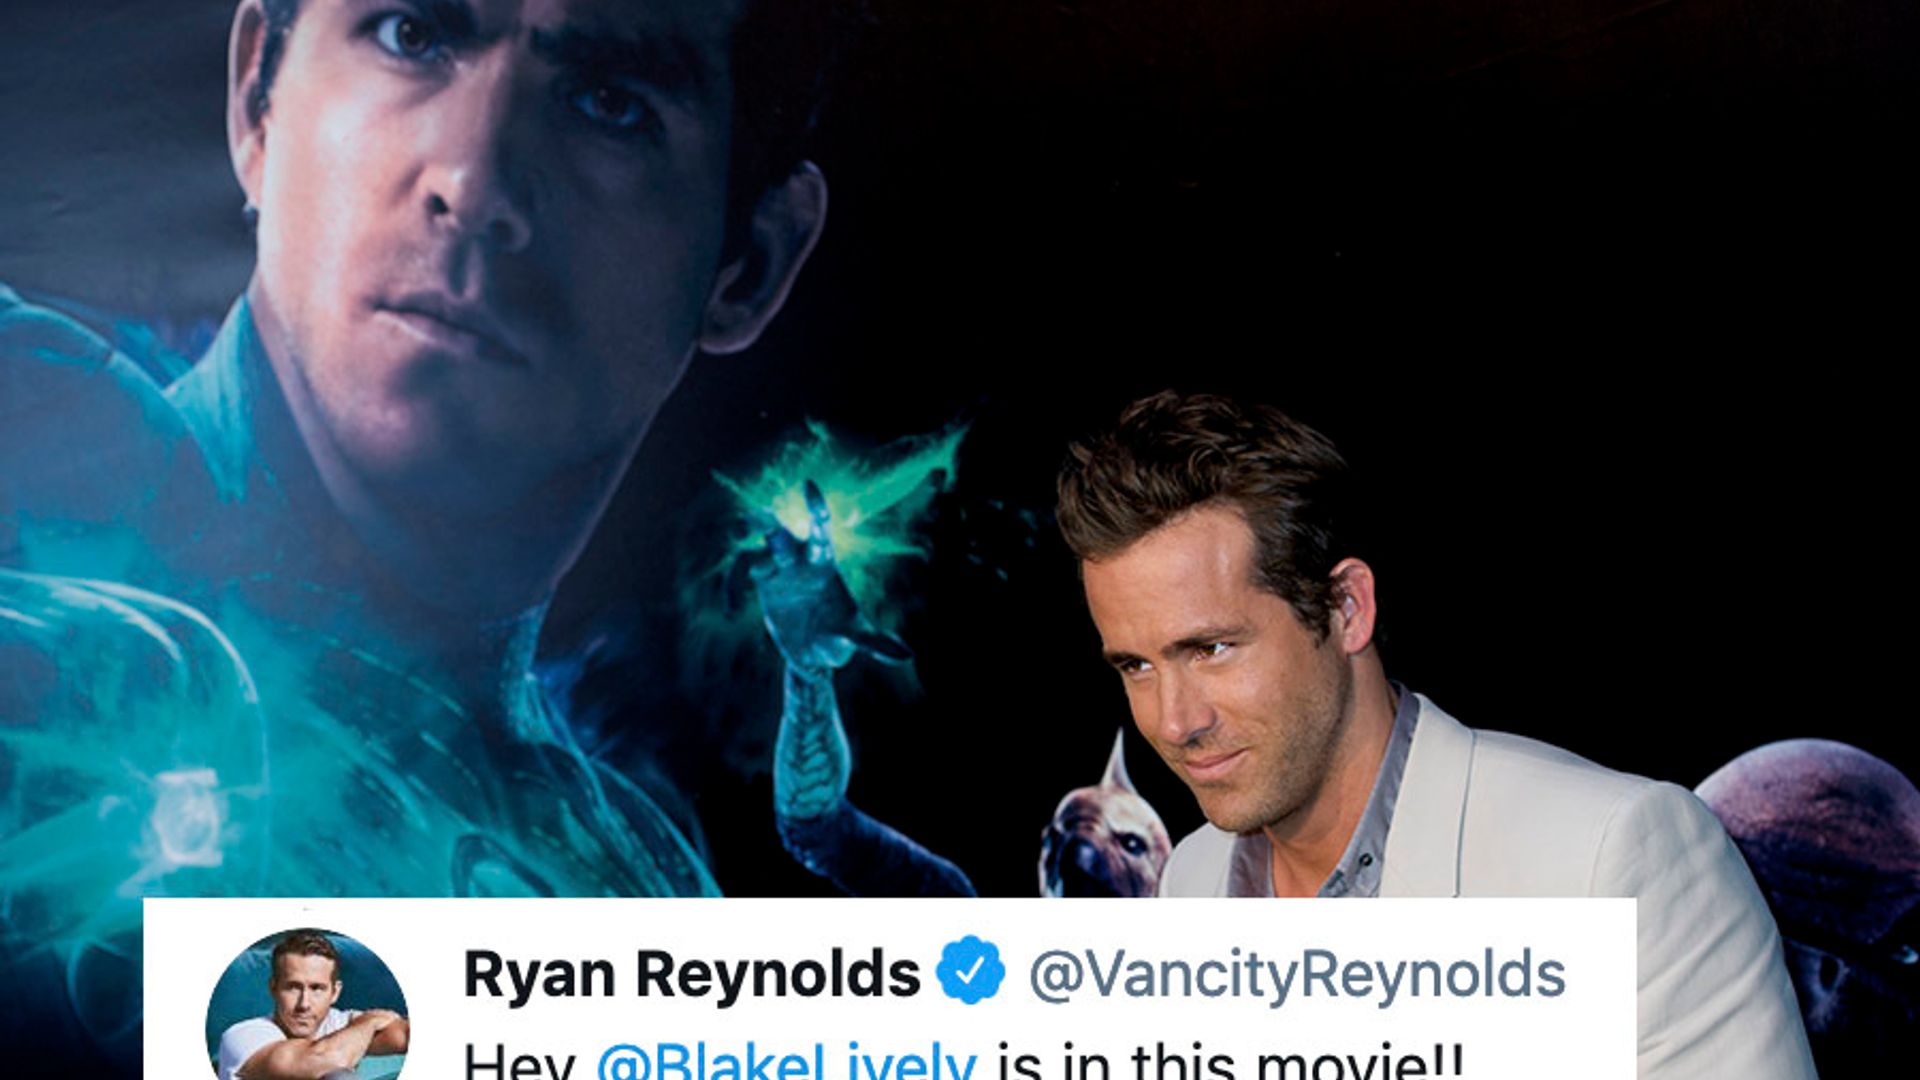 Ryan Reynolds celebrated St. Patrick’s Day by watching 'Green Lantern' for the first time and live-tweeted his hilarious reactions